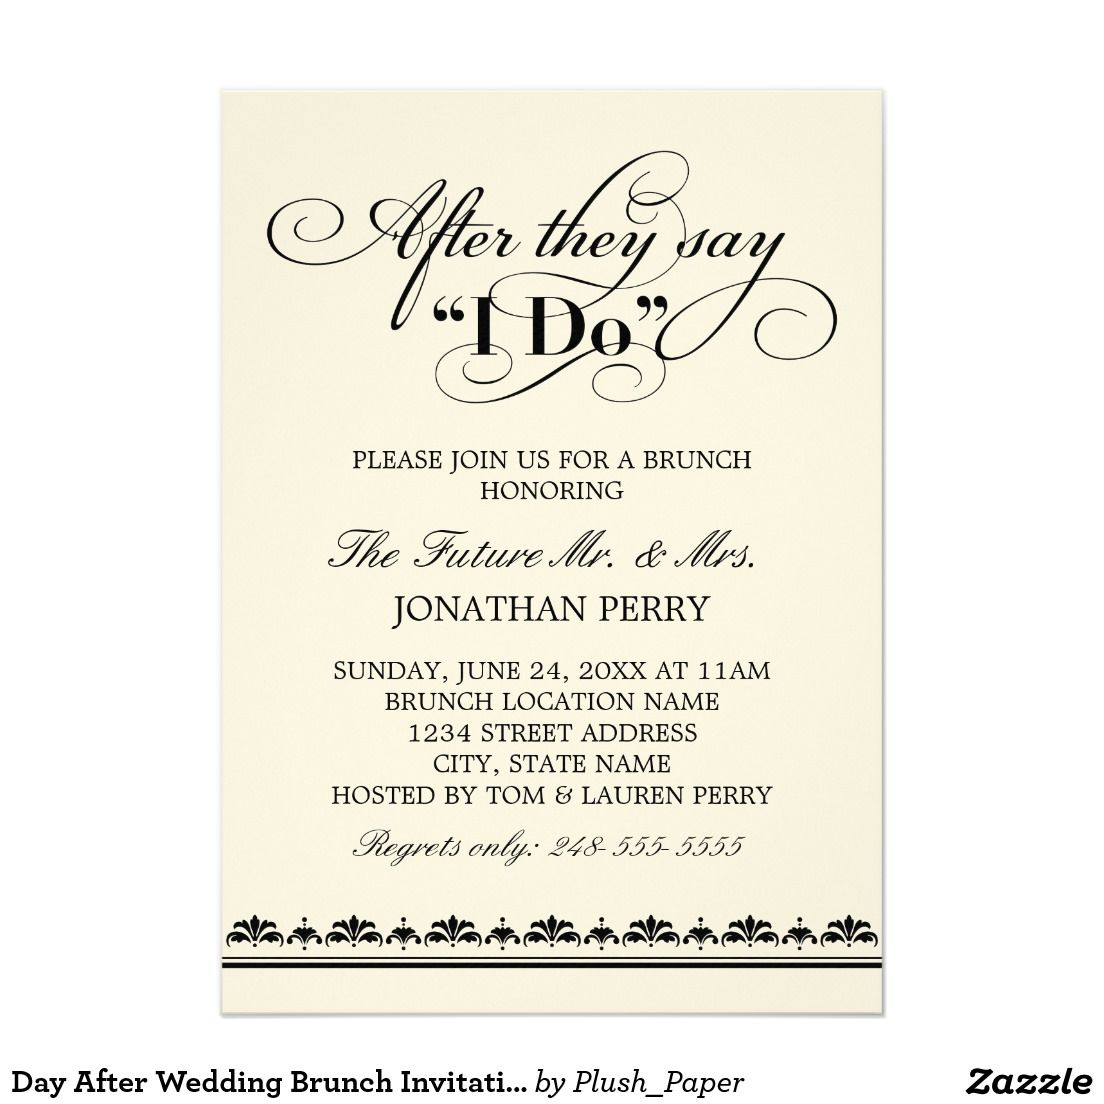 Post Wedding Brunch Invitations Day After Wedding Brunch Invitation Wedding Vows 5 X 7